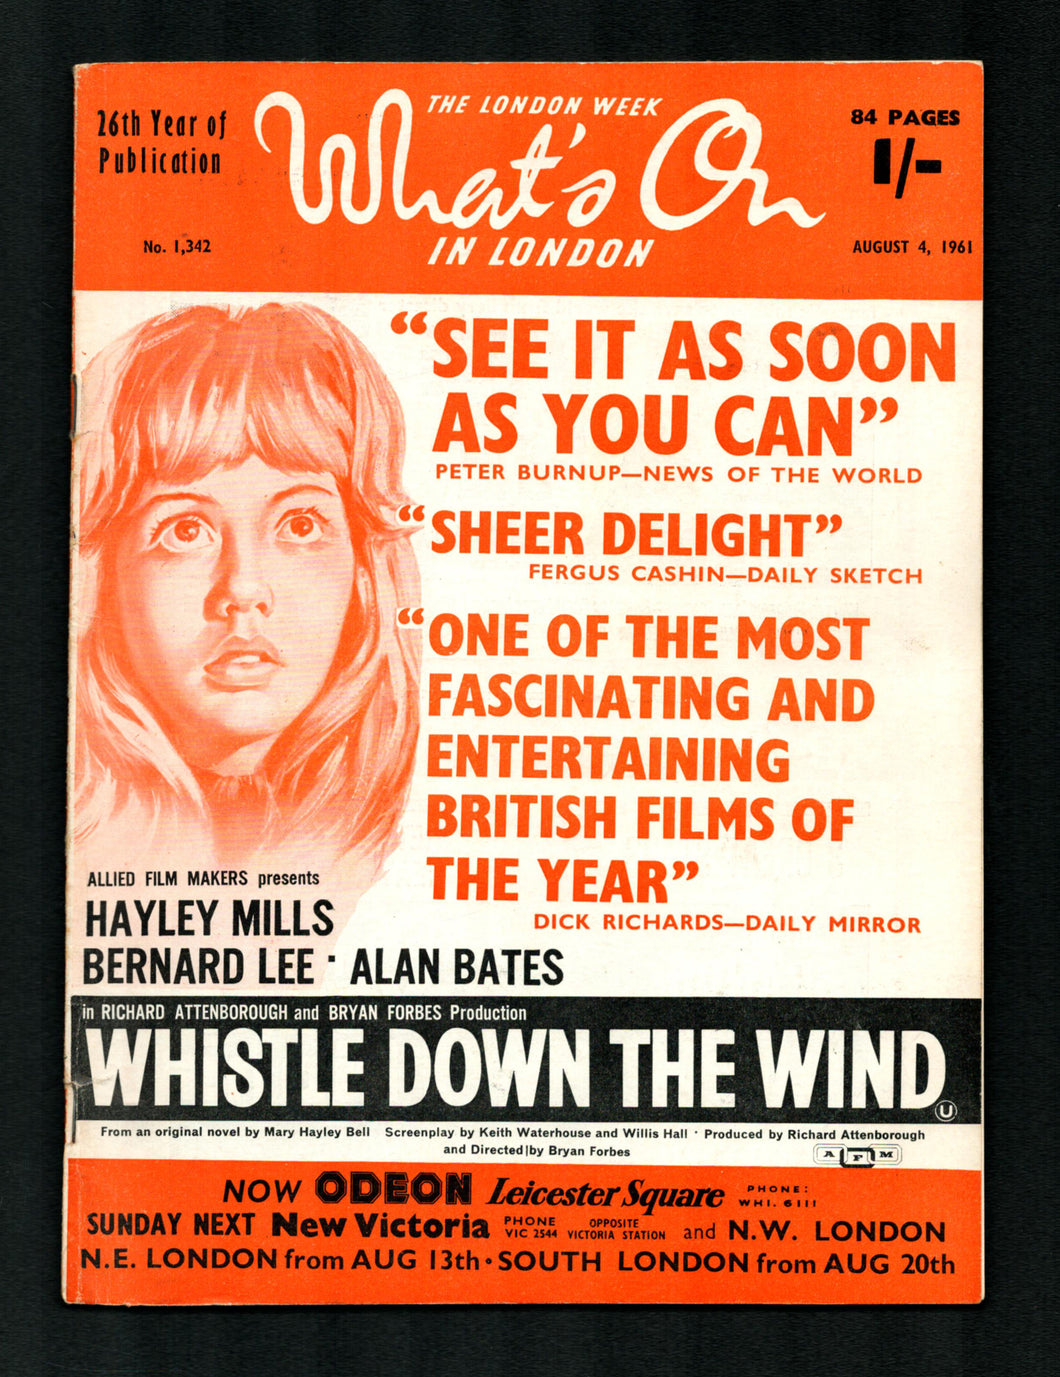 Whats on in London No 1342 Aug 4 1961